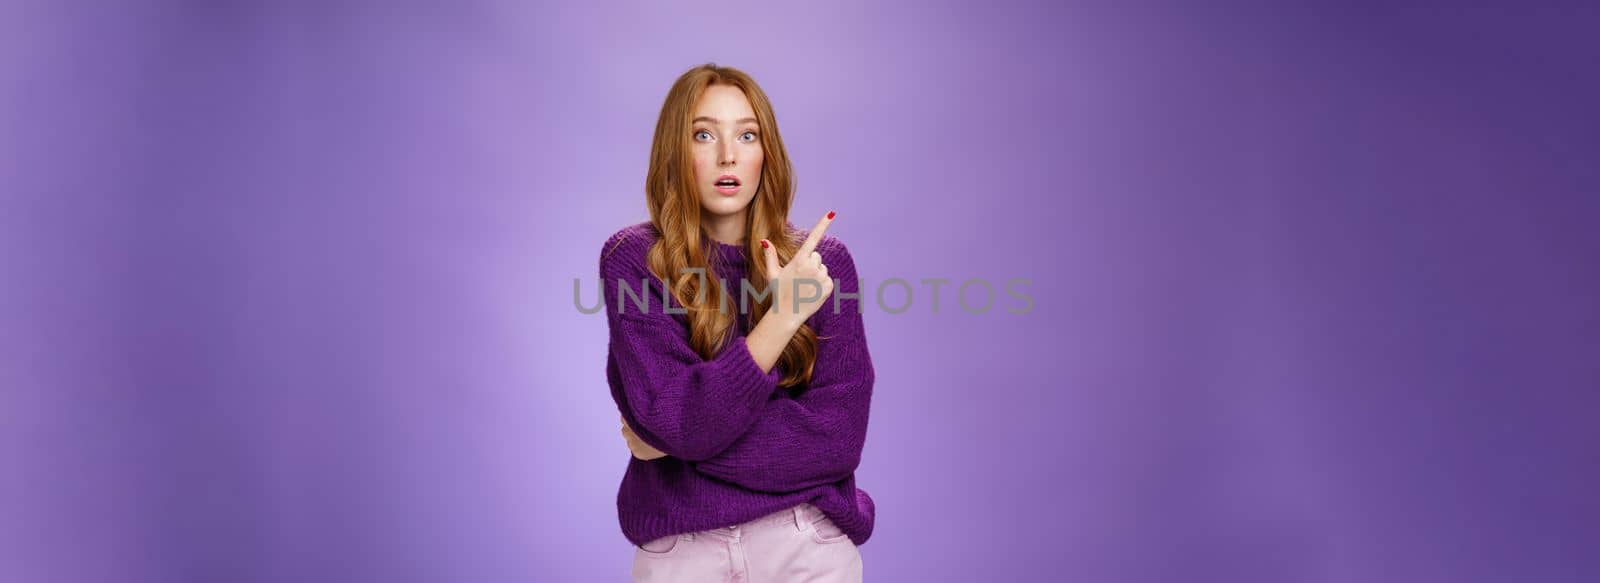 Astonished excited redhead woman open mouth and raise eyebrows questioned as seing shocking thing pointing at upper left corner, asking question impressed and surprised over purple wall.